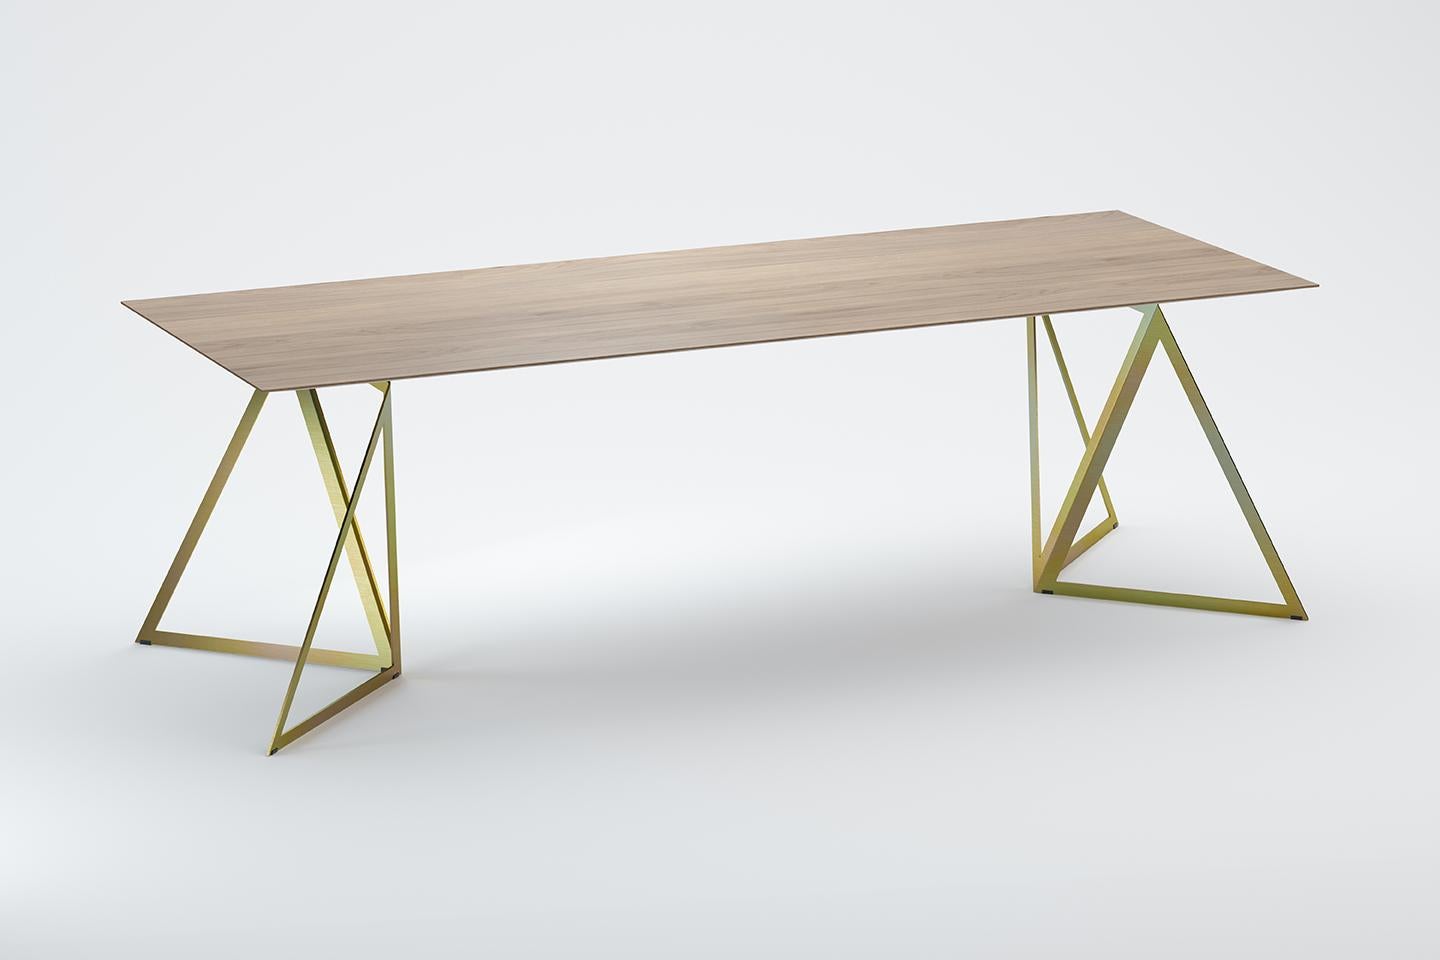 Steel Stand Table 240 Oak by Sebastian Scherer.
Dimensions: D240 x W90 x H74 cm.
Materials: Oak, Steel, Wood.
Also Available: Colours:Solid wood (matt lacquered or oiled): black and white stained ash / natural oak / american walnut
Steel (matt):